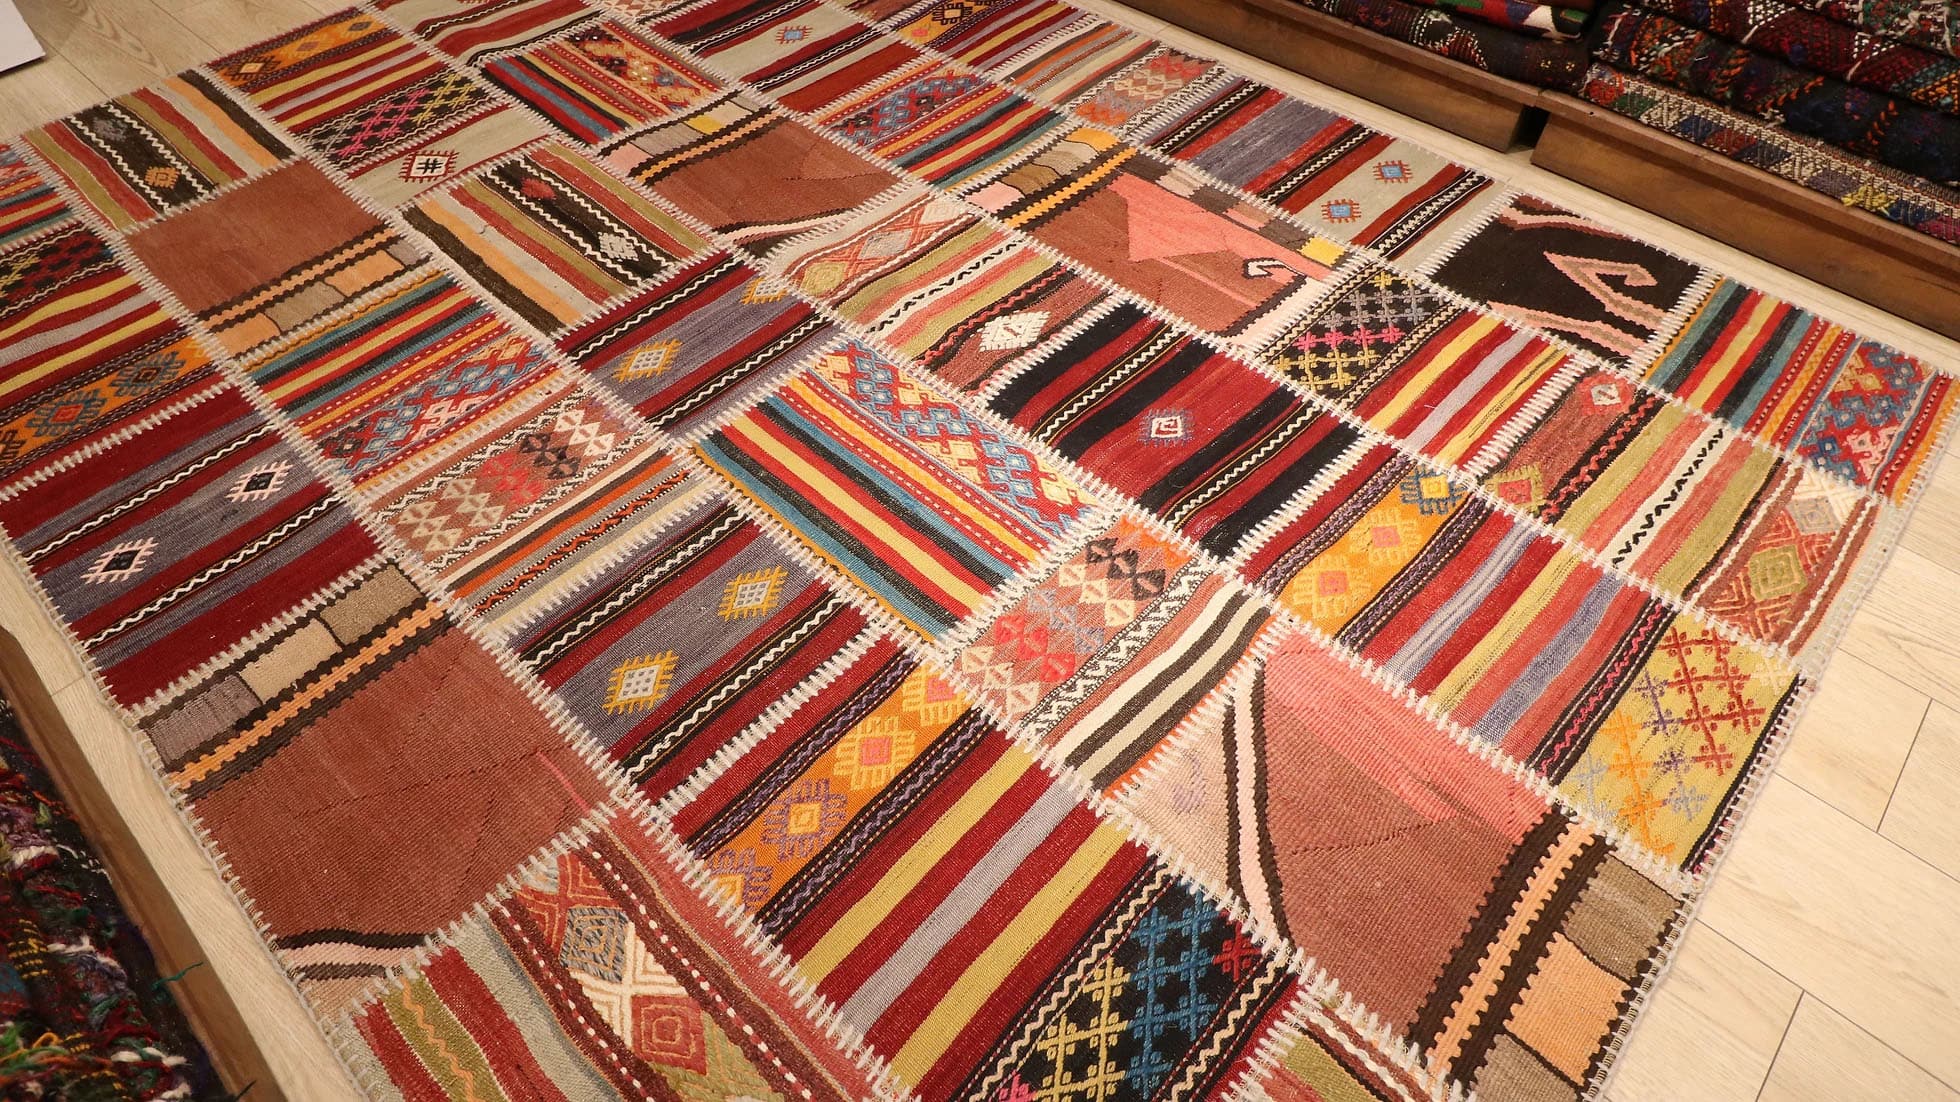 meticulously handwoven semi-antique patchwork rug made of different antique Turkish carpet fragments